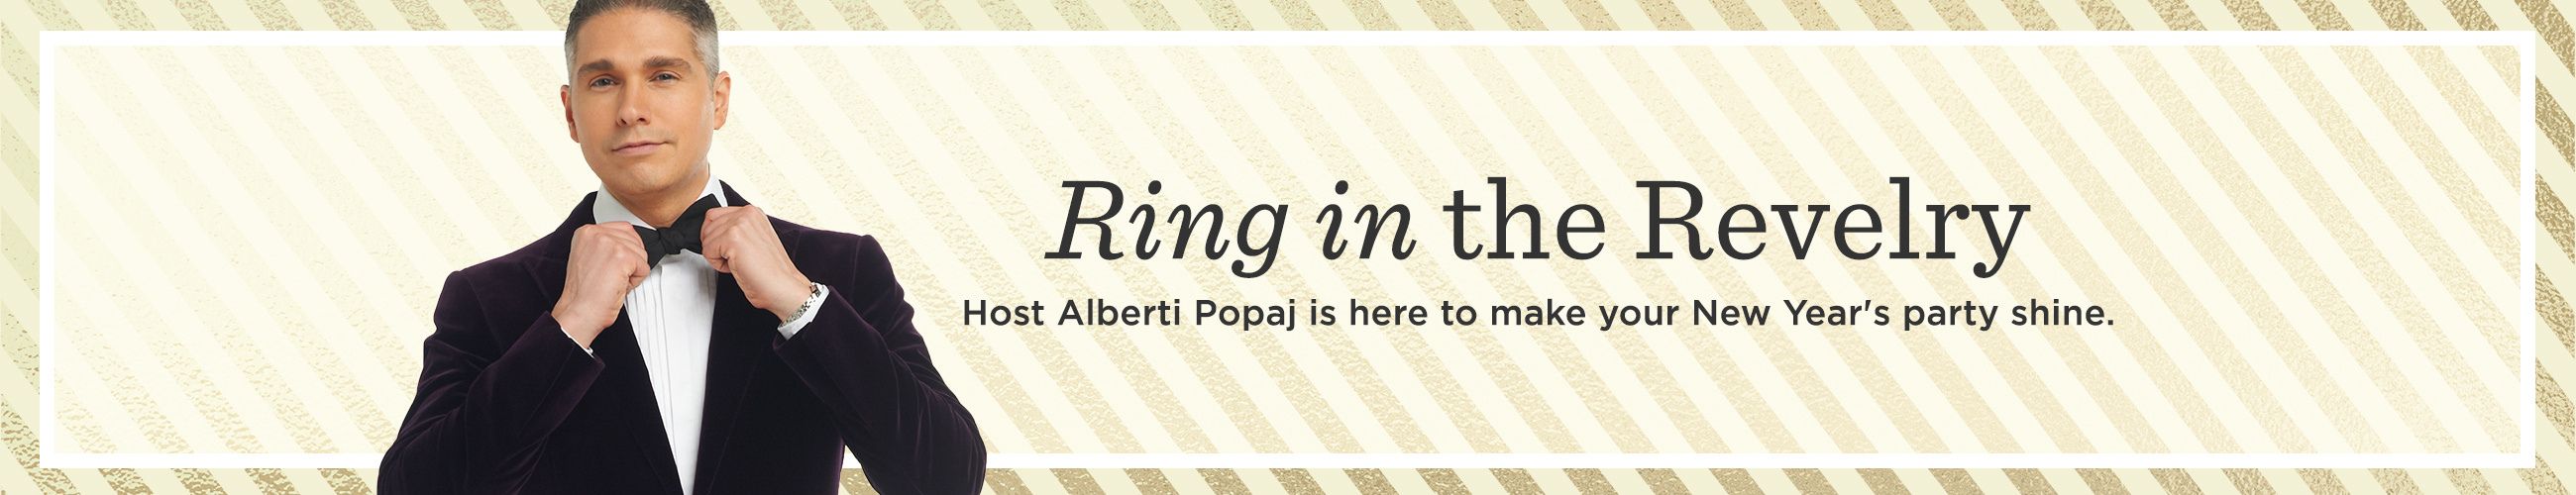 Ring in the Revelry — Host Alberti Popaj is here to make your New Year's party shine.